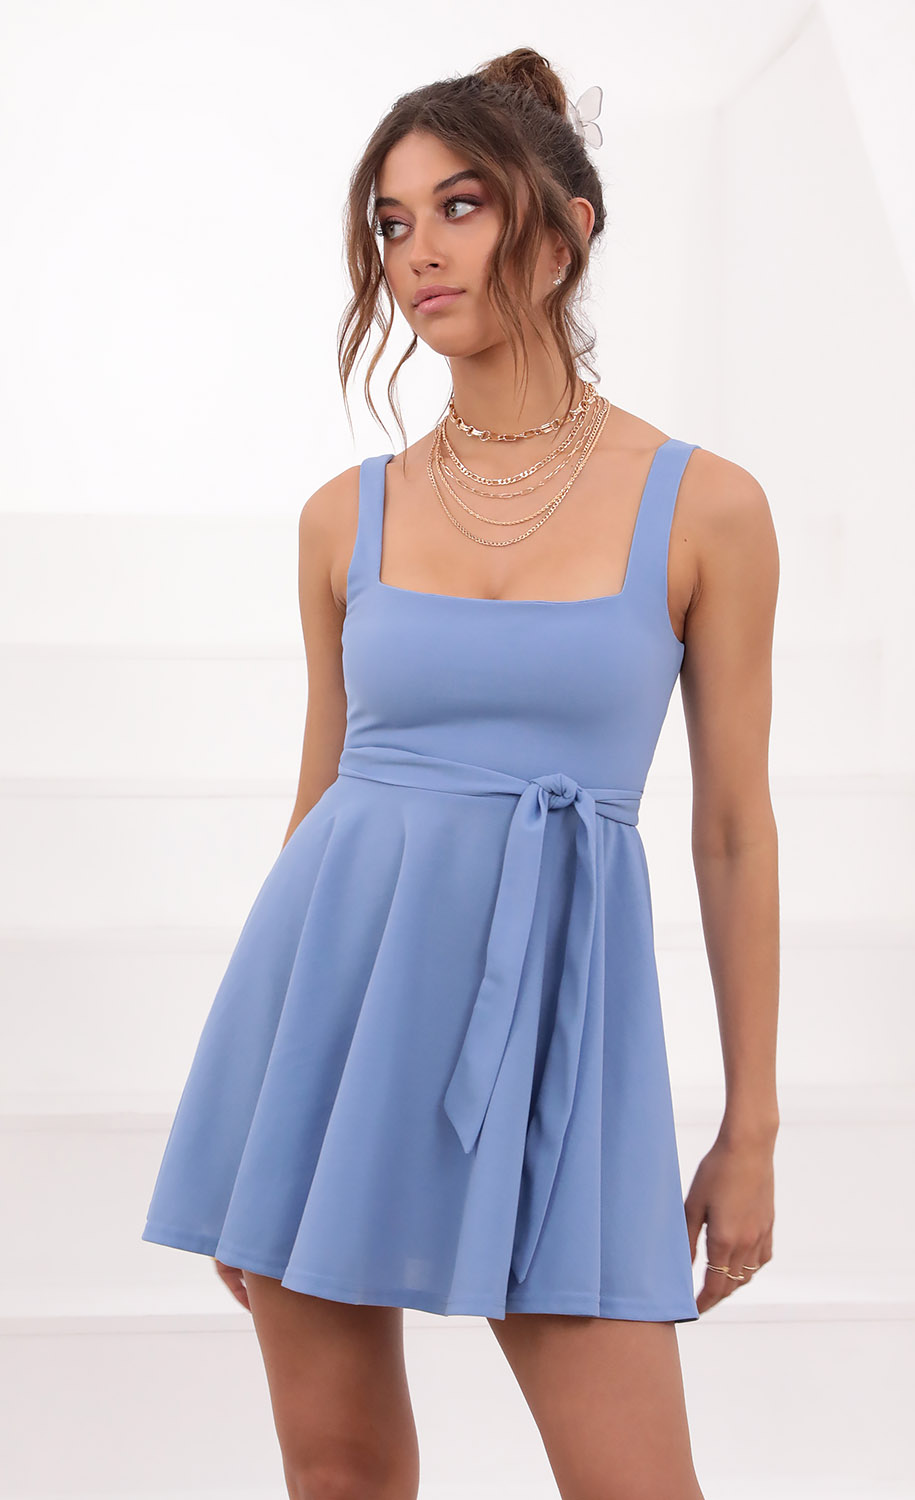 A-line Dress in Palace Blue